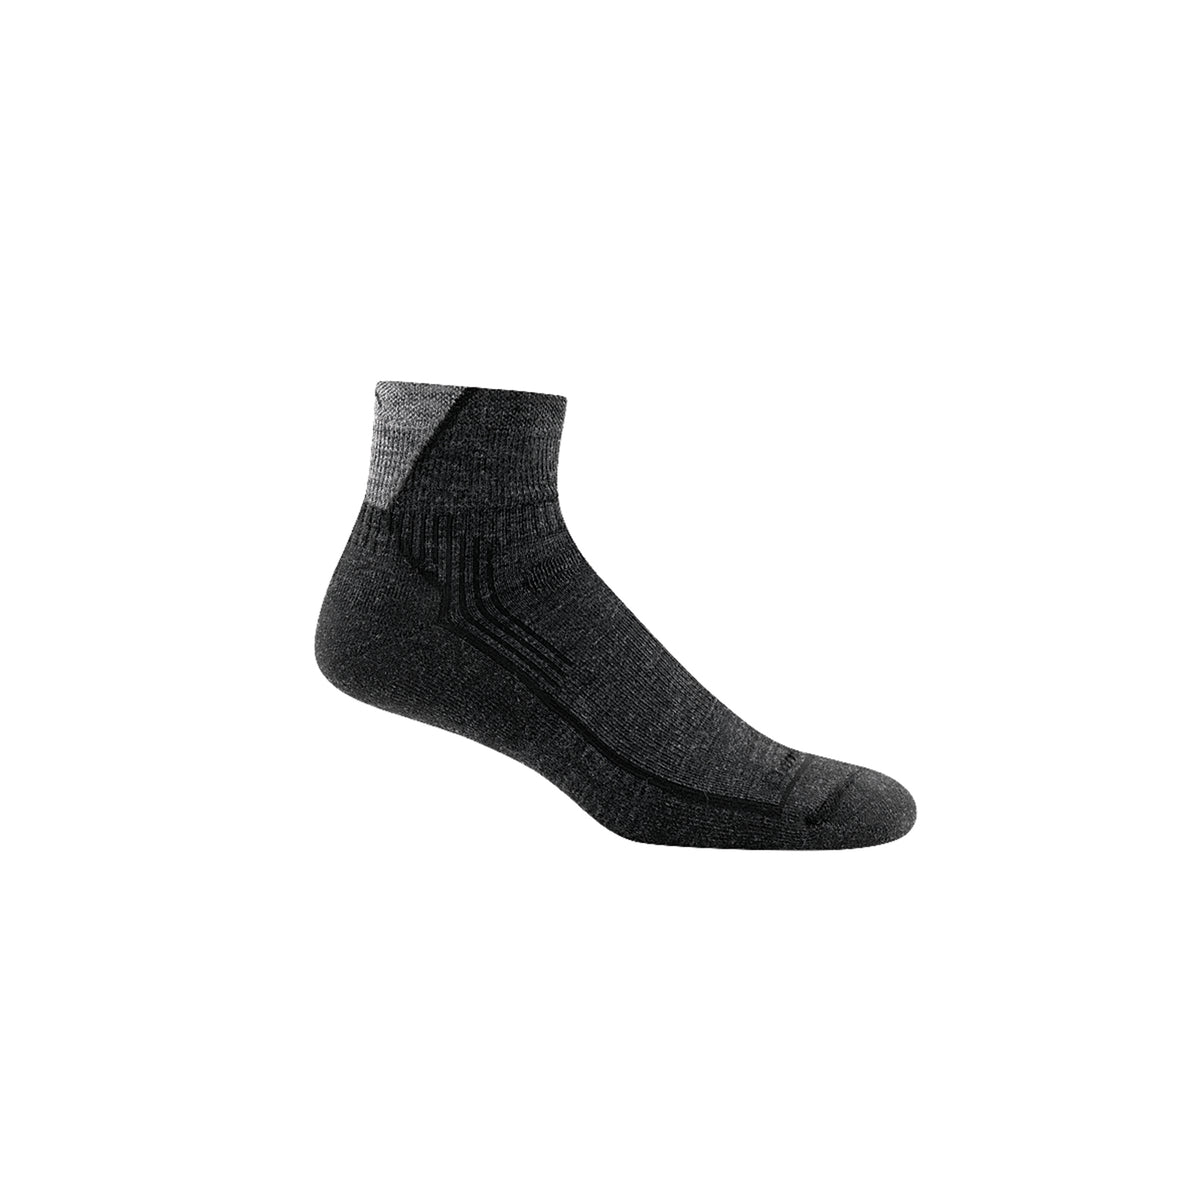 sideview of 1/4 length mens sock in black and light grey with black stripe